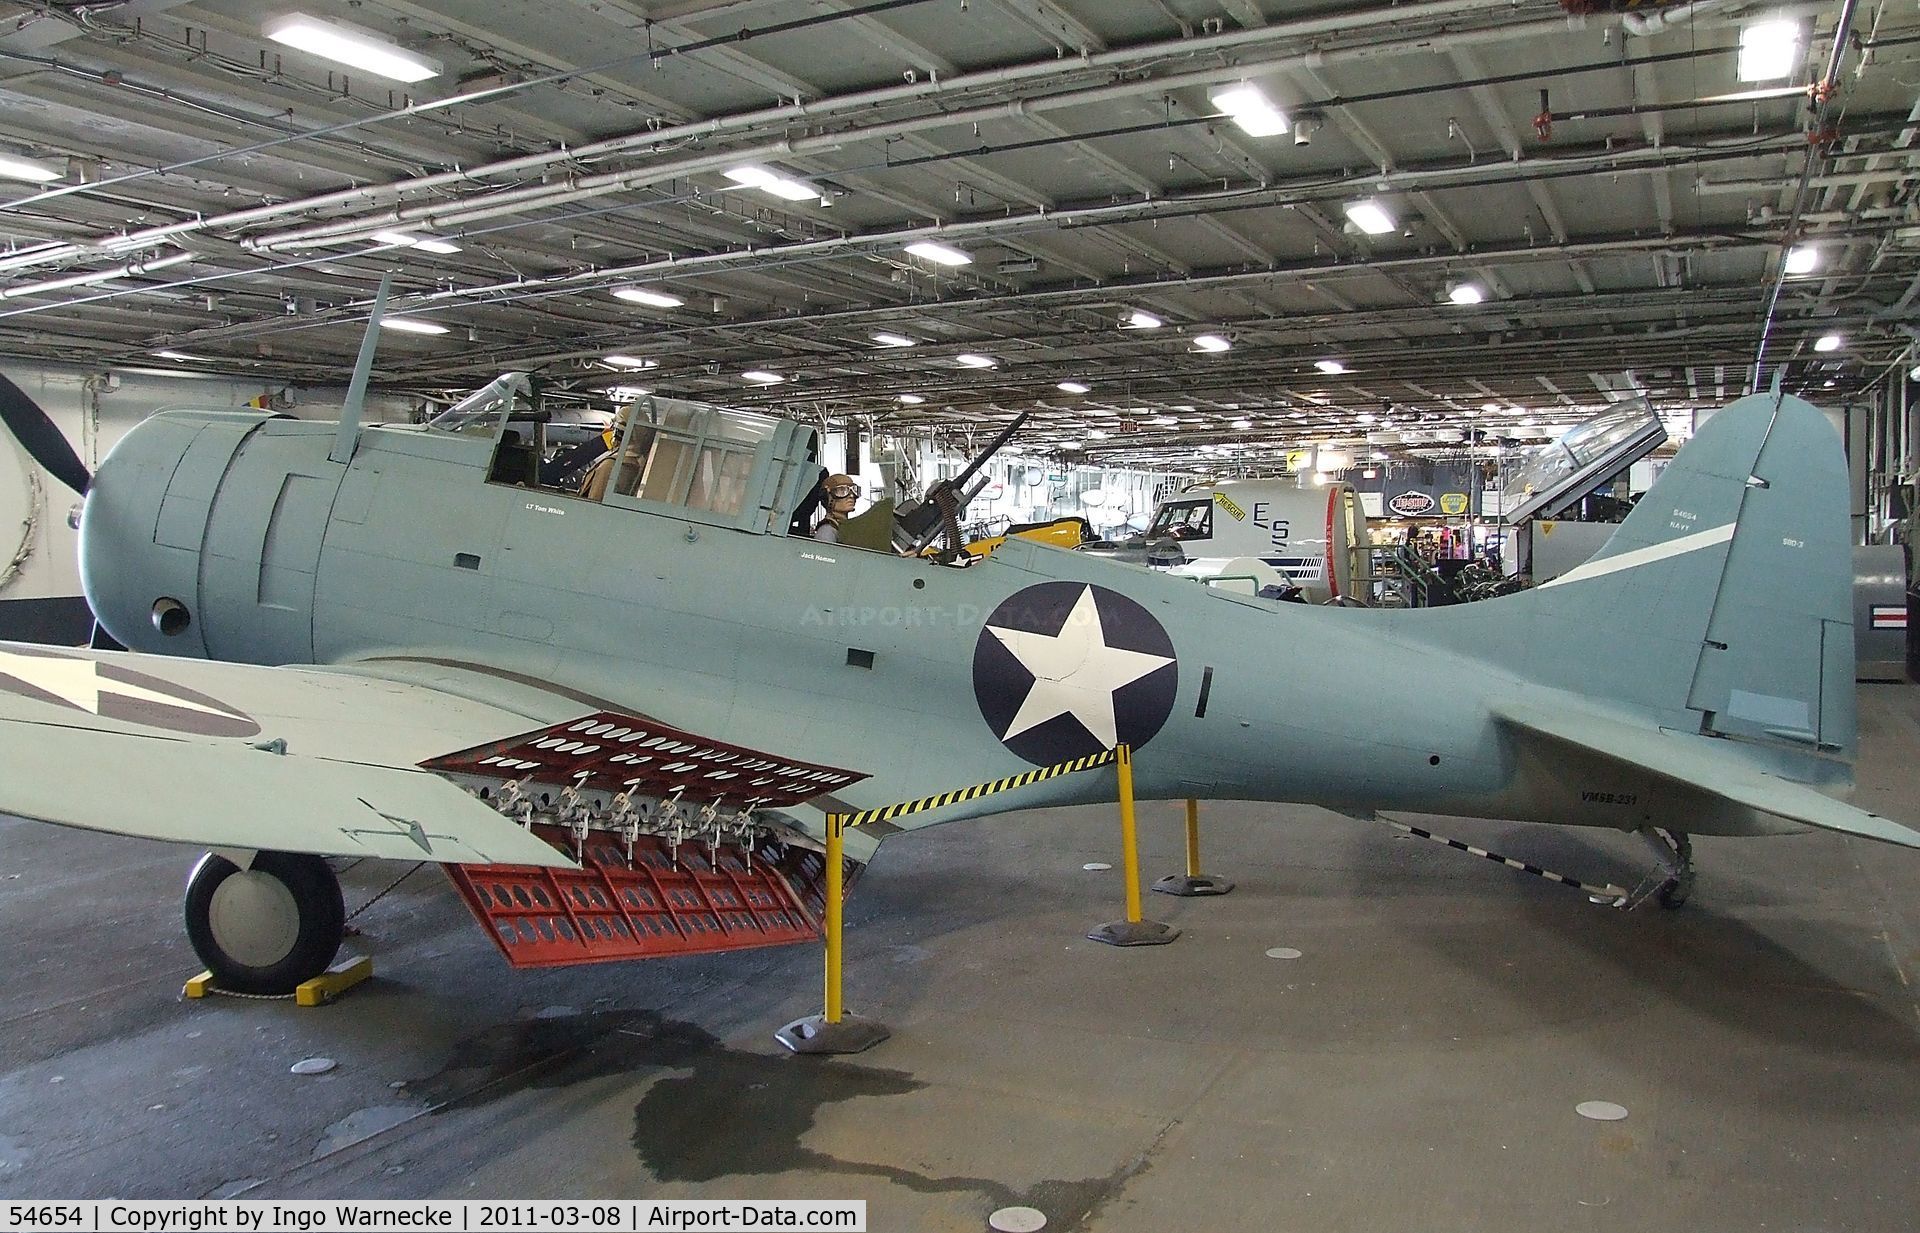 54654, Douglas SBD-6 Dauntless C/N 6168, Douglas SBD-6 Dauntless (rebuilt with aft fuselage of 54654 and parts of other SBDs) in the Hangar of the USS Midway Museum, San Diego CA